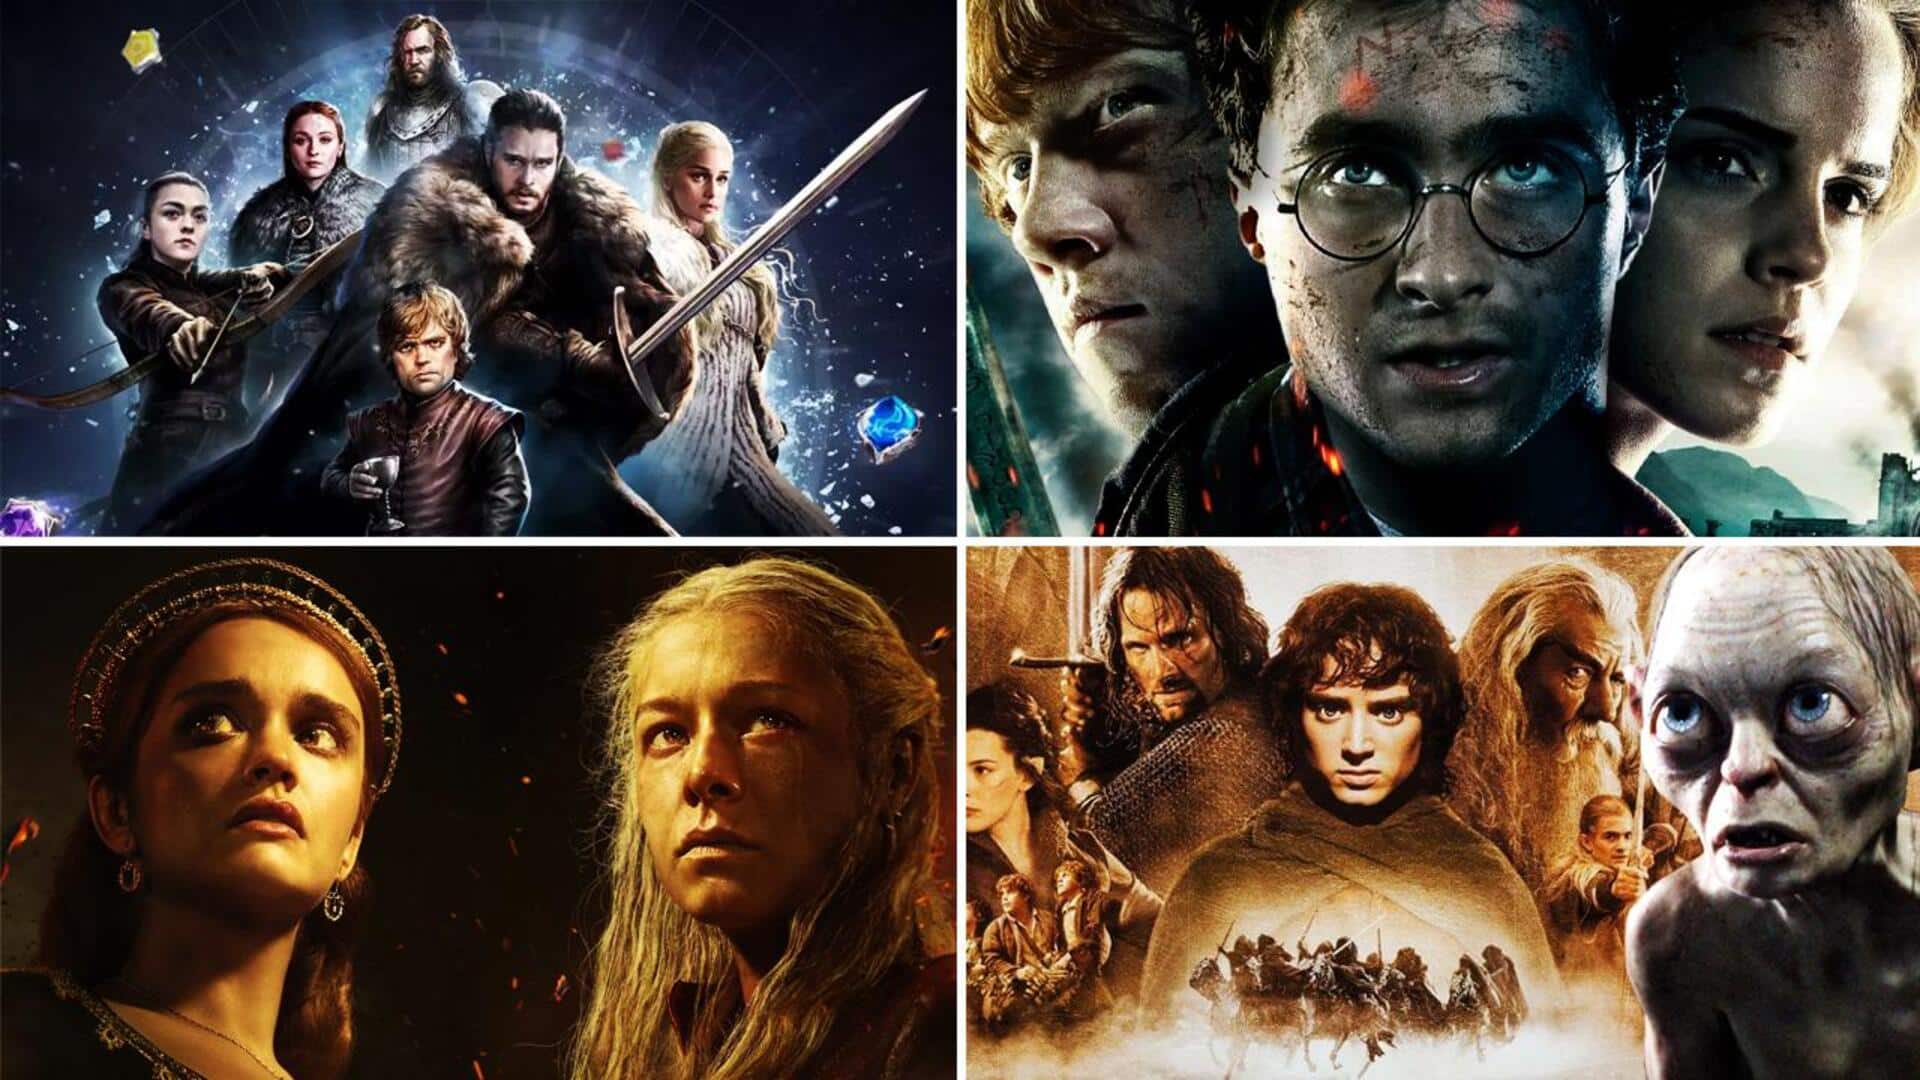 'Game of Thrones,' 'Harry Potter': Fantasy titles featuring ensemble cast